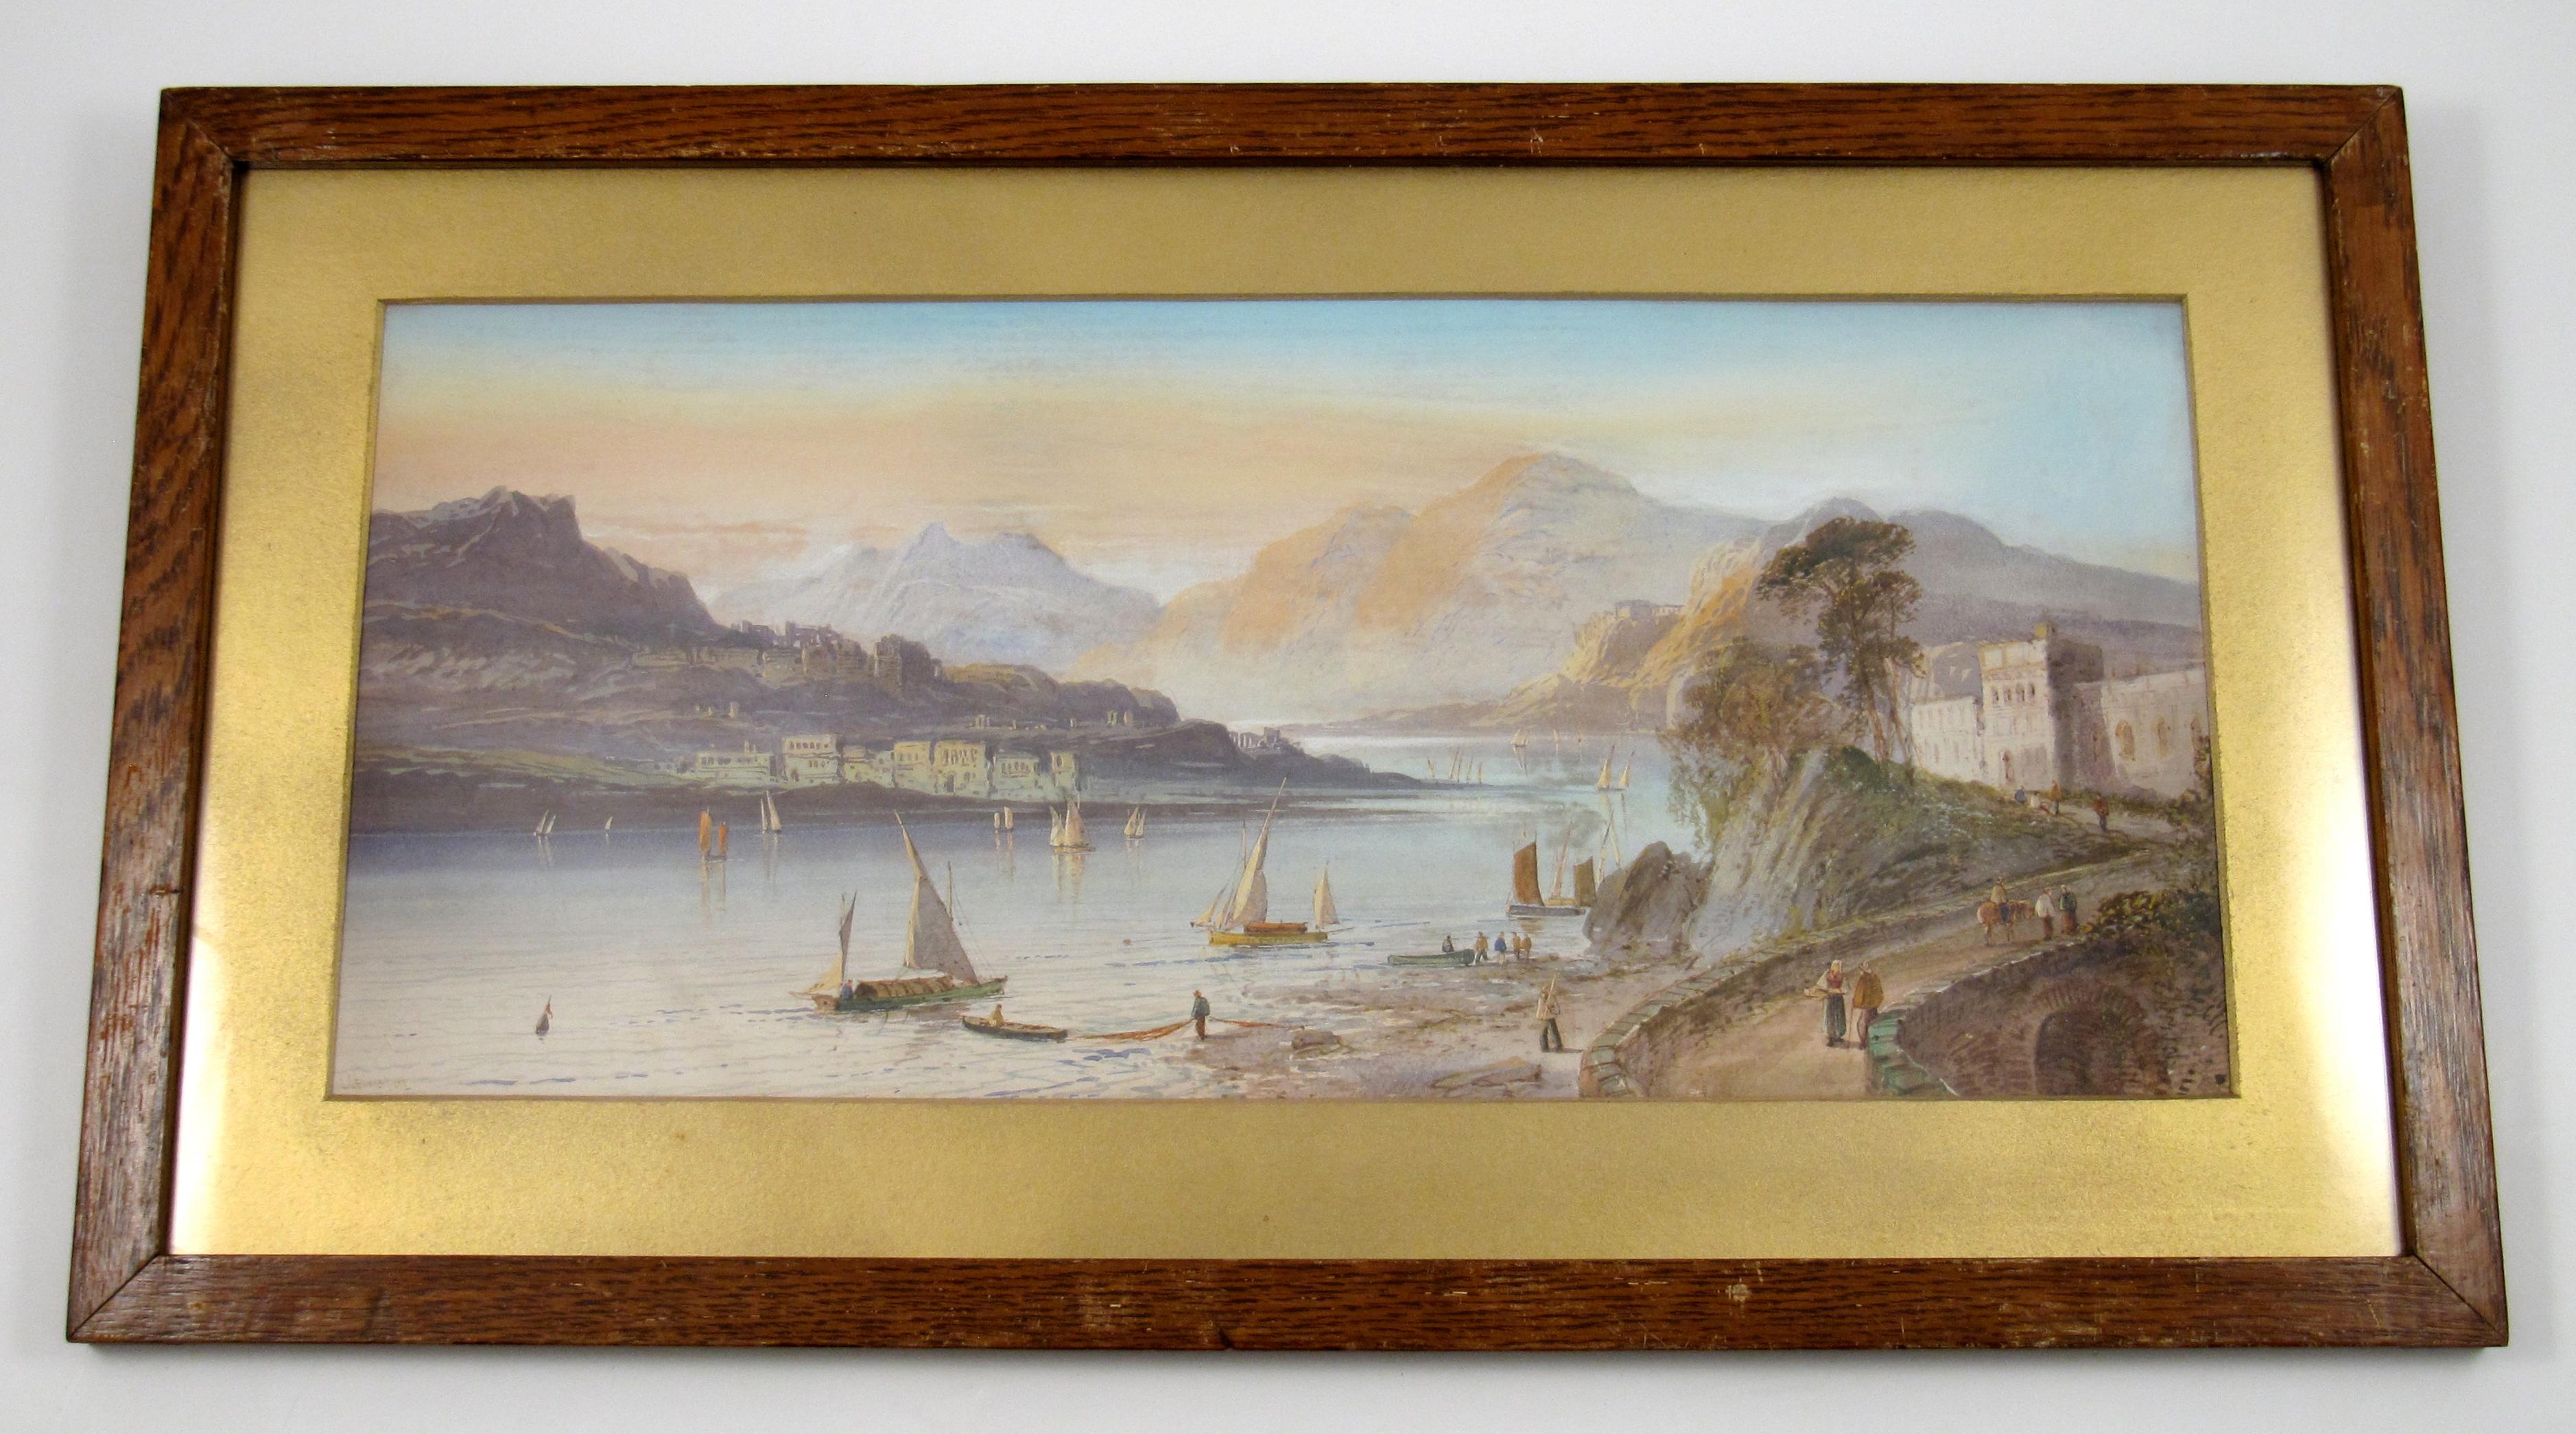 Lennard Lewis
(British, 1826 - 1913)

View of the Lago Maggiore and the Mountains of southern Switzerland

•	Water colour on paper
•	Signed and dated lower left corner
•	Visible image, ca. 23.5 x 54 cm
•	Somewhat later, glased oak frame, ca. 37 x